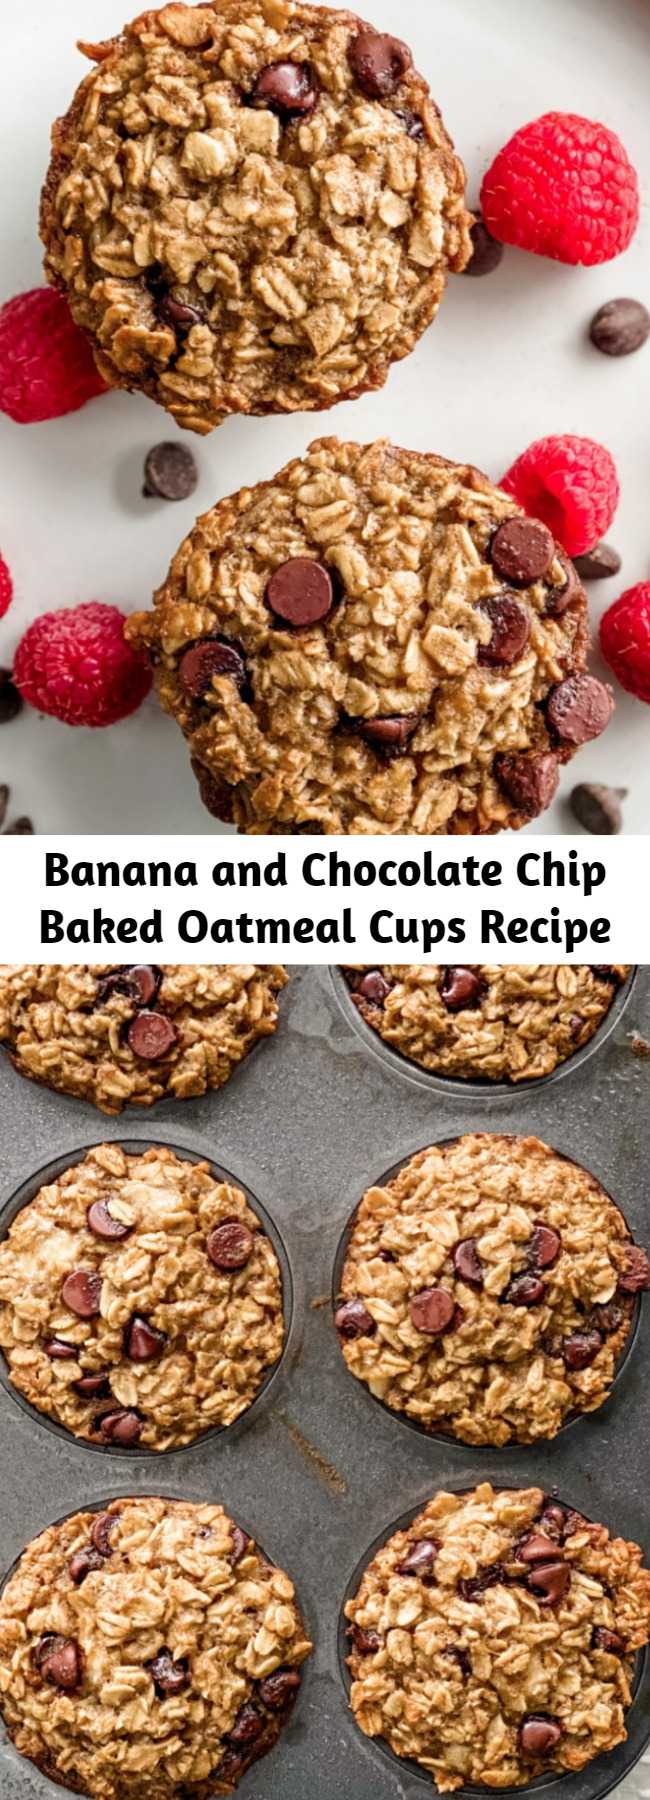 Banana and Chocolate Chip Baked Oatmeal Cups Recipe - At just 200 calories and 6 Weight Watcher points, you can meal prep these delicious Banana and Chocolate Chip Oatmeal Cups for breakfast all week!